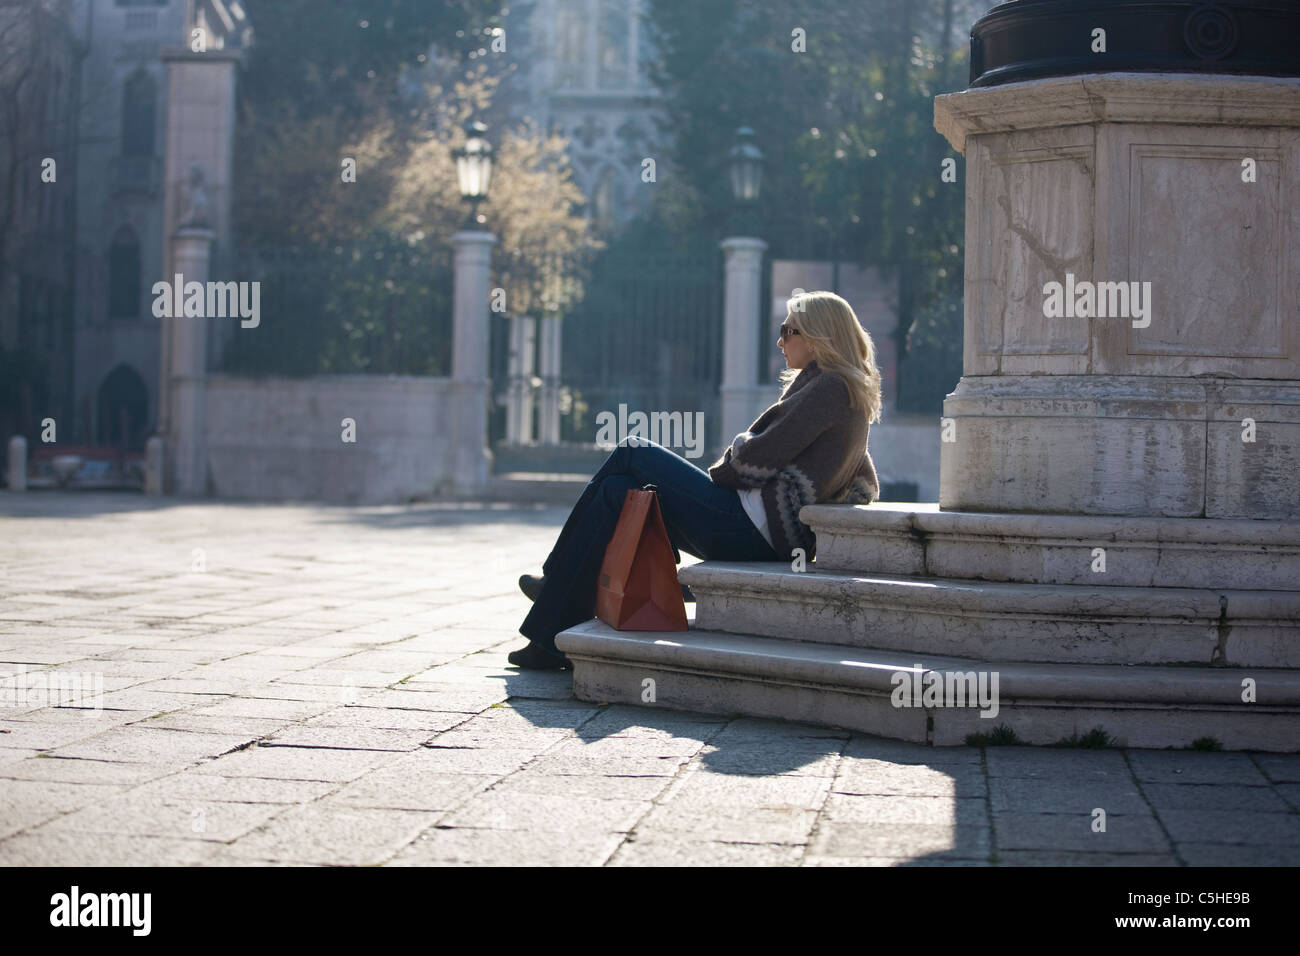 A woman sitting at the base of a statue, Campo Santo Stefano,Venice, Italy Stock Photo